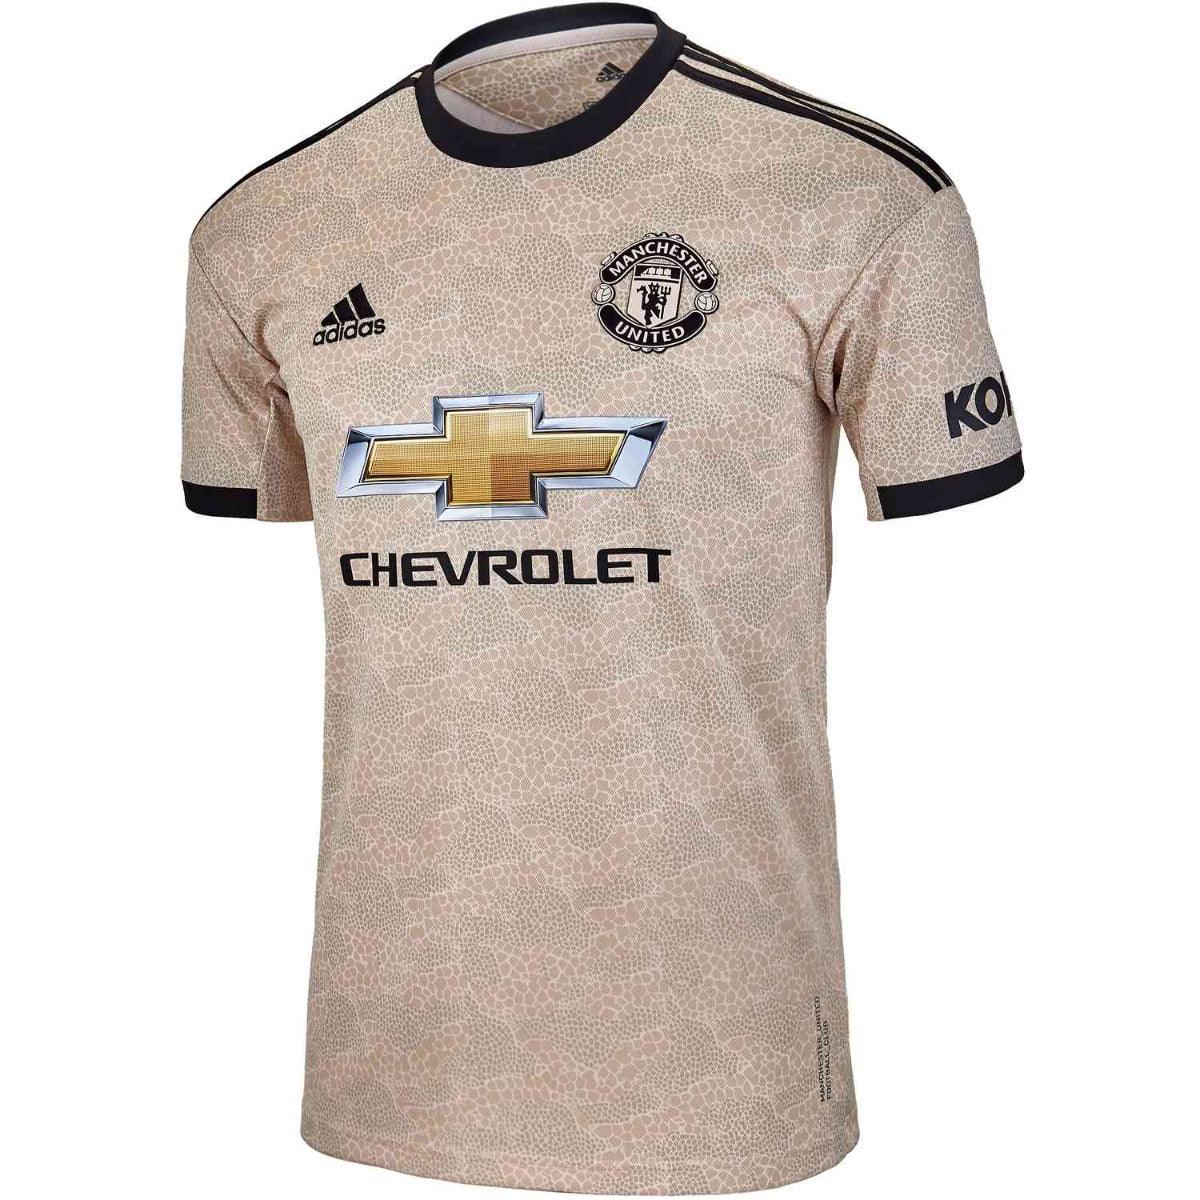 Manchester United 2019/2020 Away Jersey - Obeezi.com